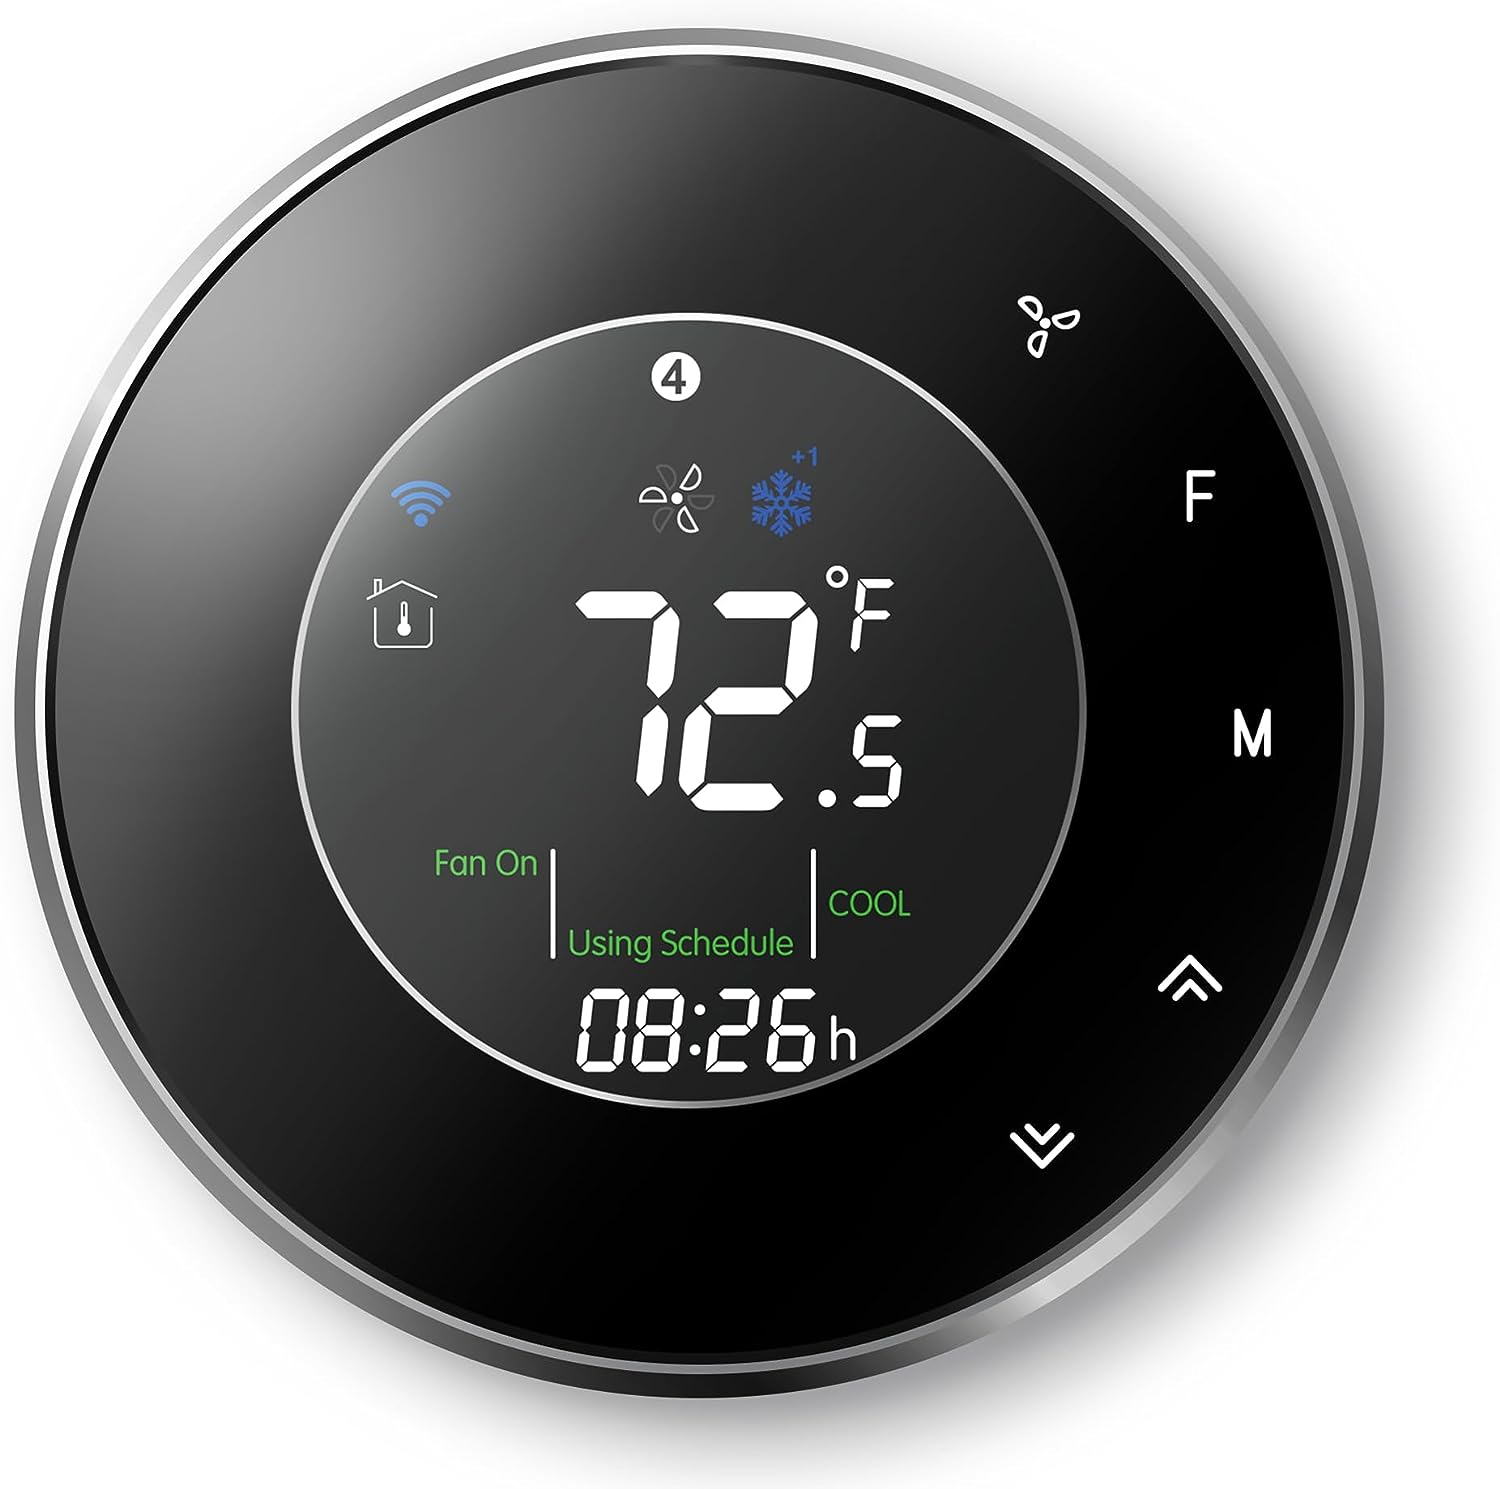 Smart Thermostat for Home, WiFi Programmable Digital Thermostat, Black-A3